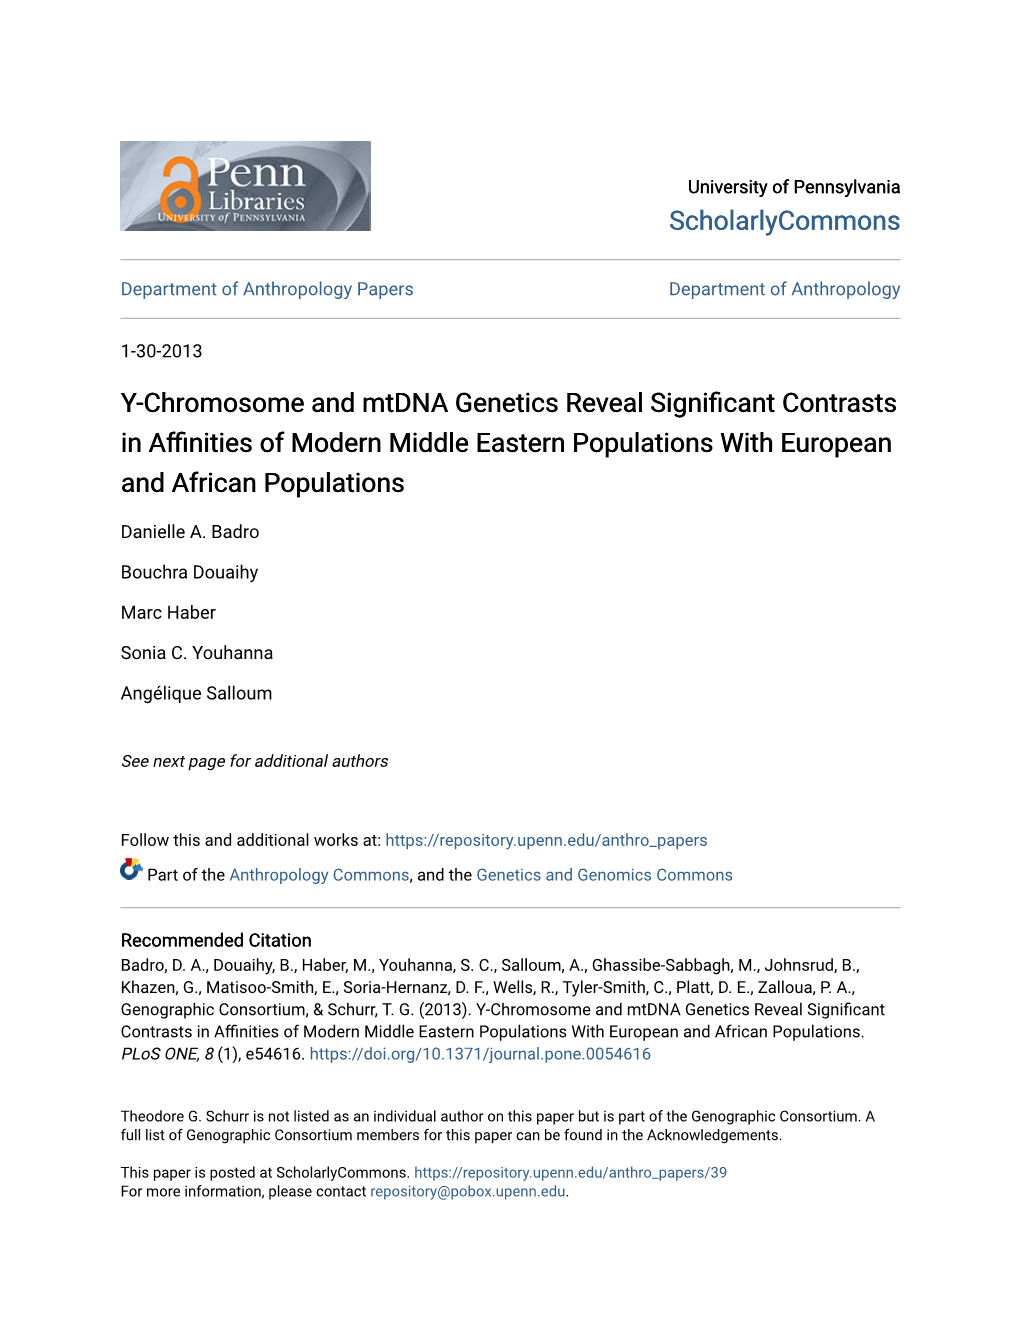 Y-Chromosome and Mtdna Genetics Reveal Significant Contrasts in Affinities of Modern Middle Easternopulations P with European and African Populations